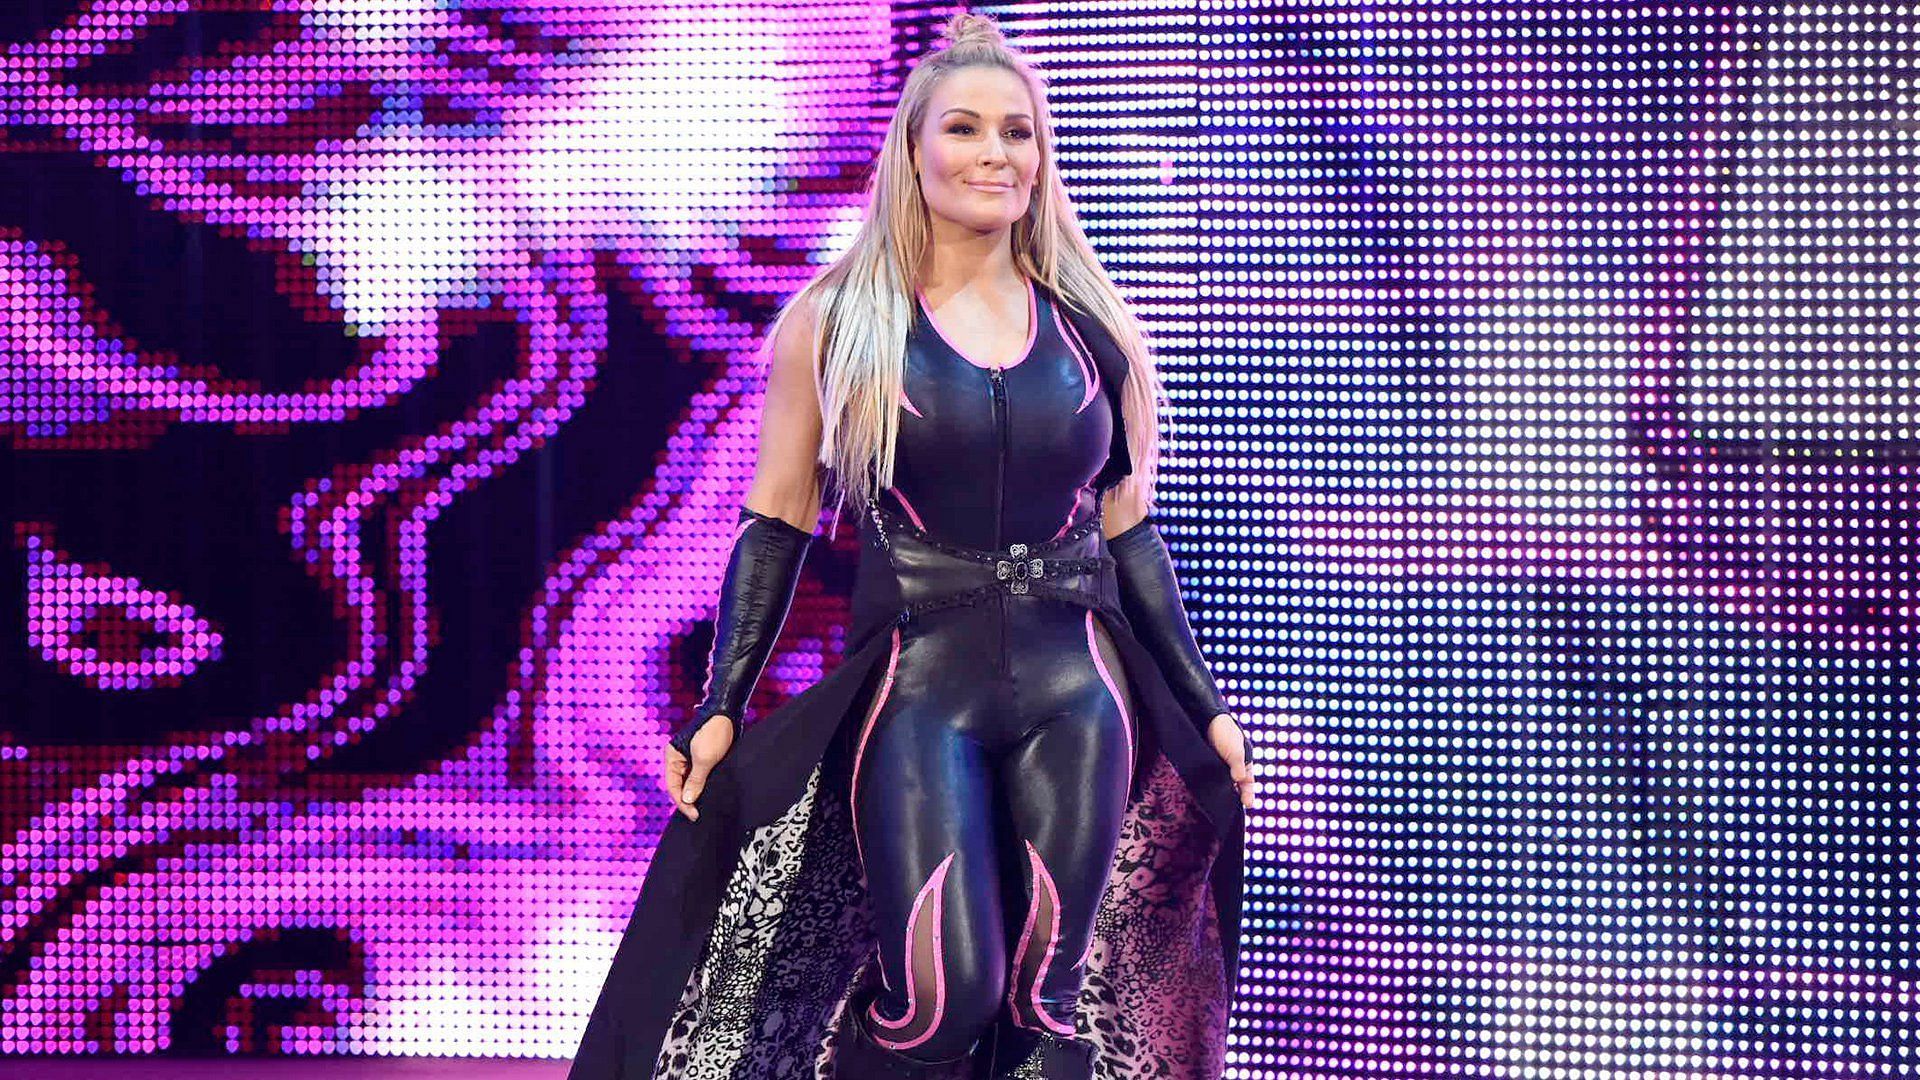 Natalya heads to the ring for a match on WWE RAW